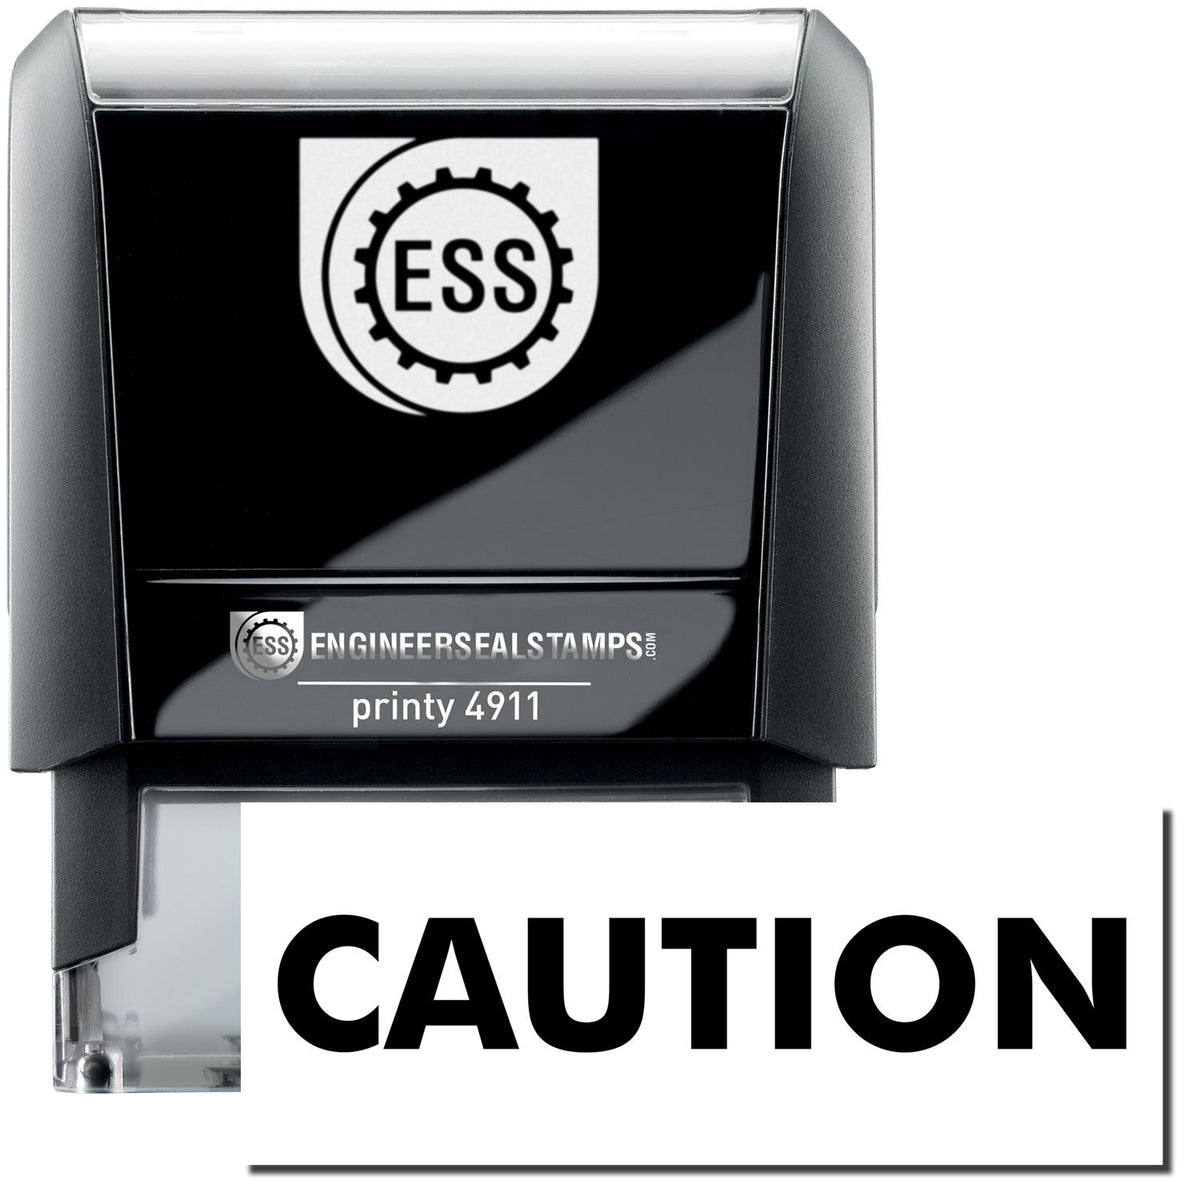 A self-inking stamp with a stamped image showing how the text &quot;CAUTION&quot; is displayed after stamping.